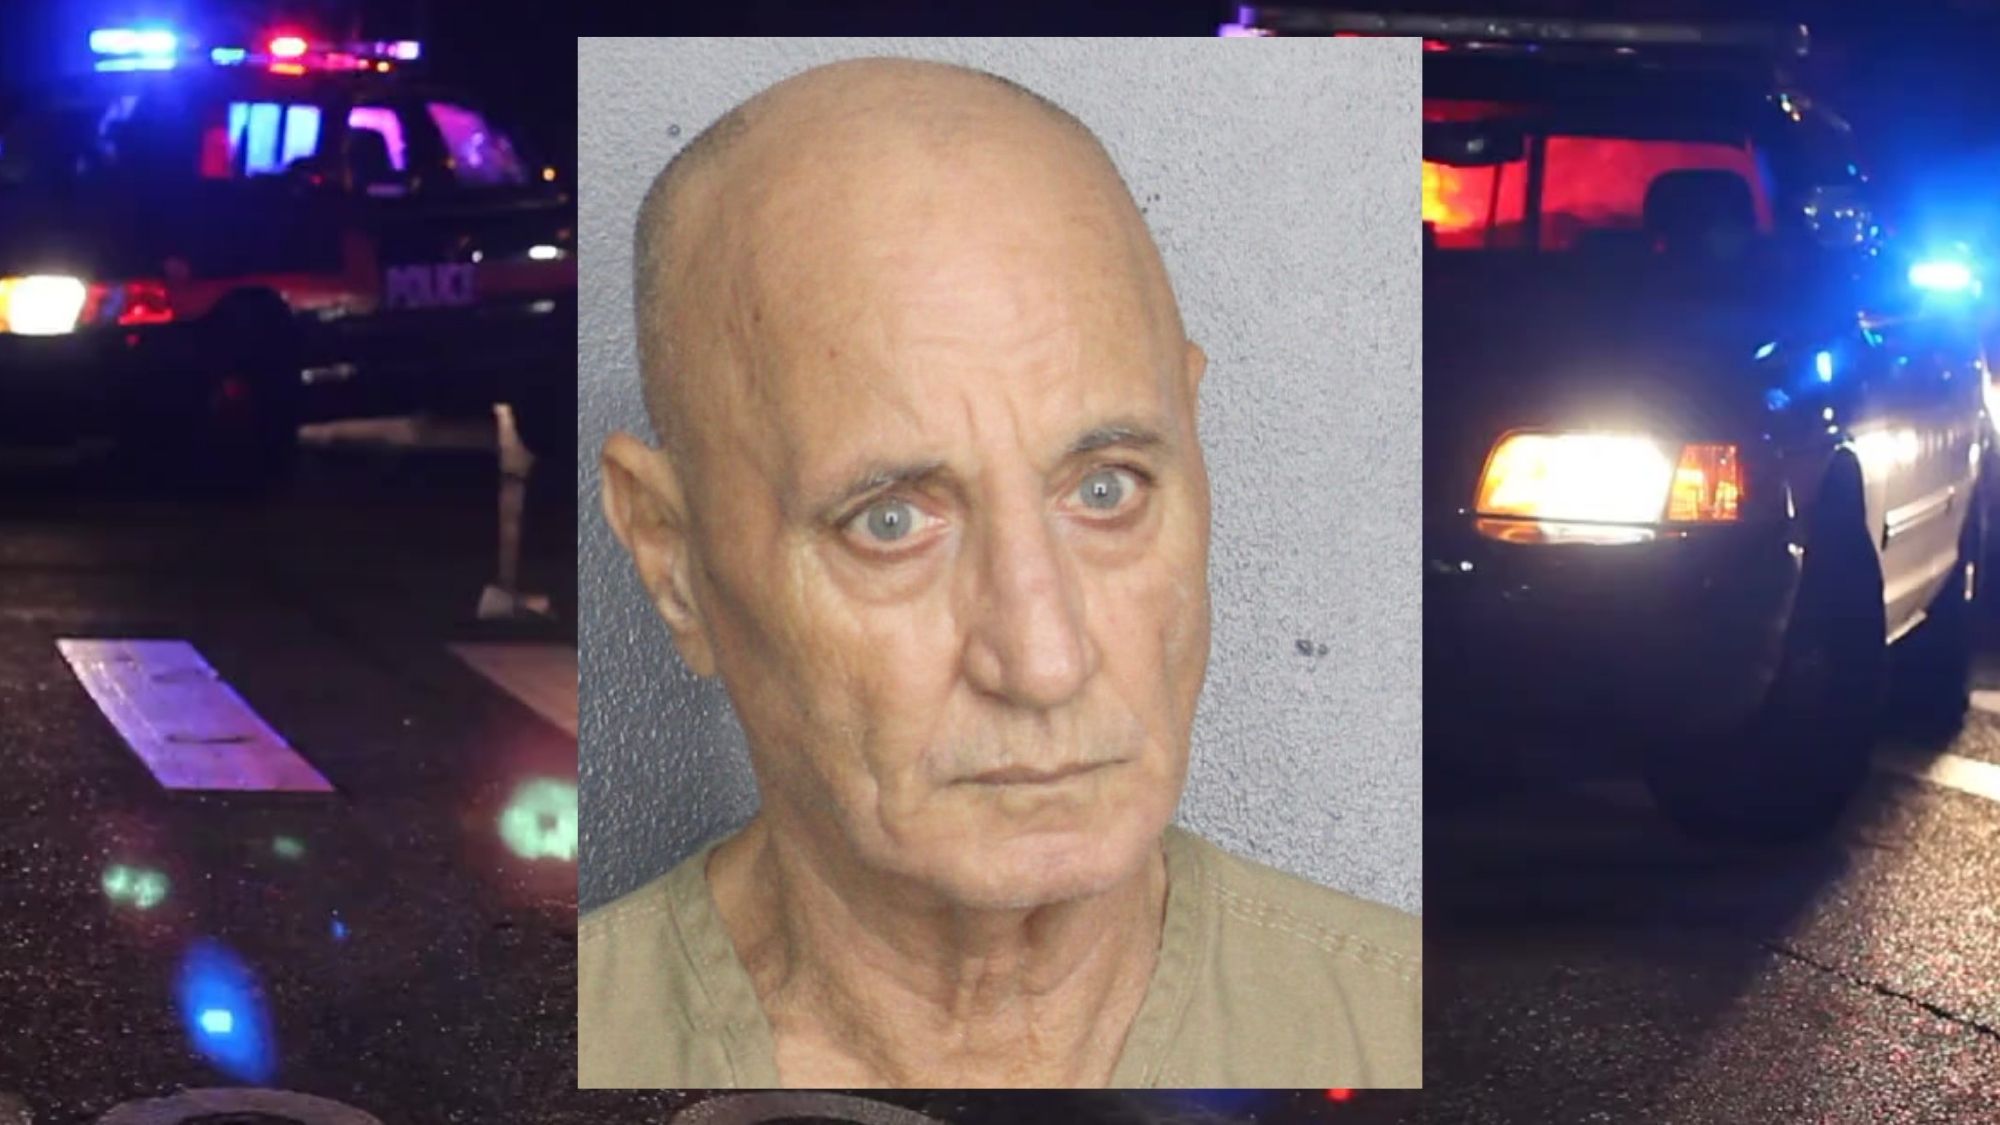 Coral Springs Man Faces Charges for Stalking and Threatening Victim Despite Restraining Order